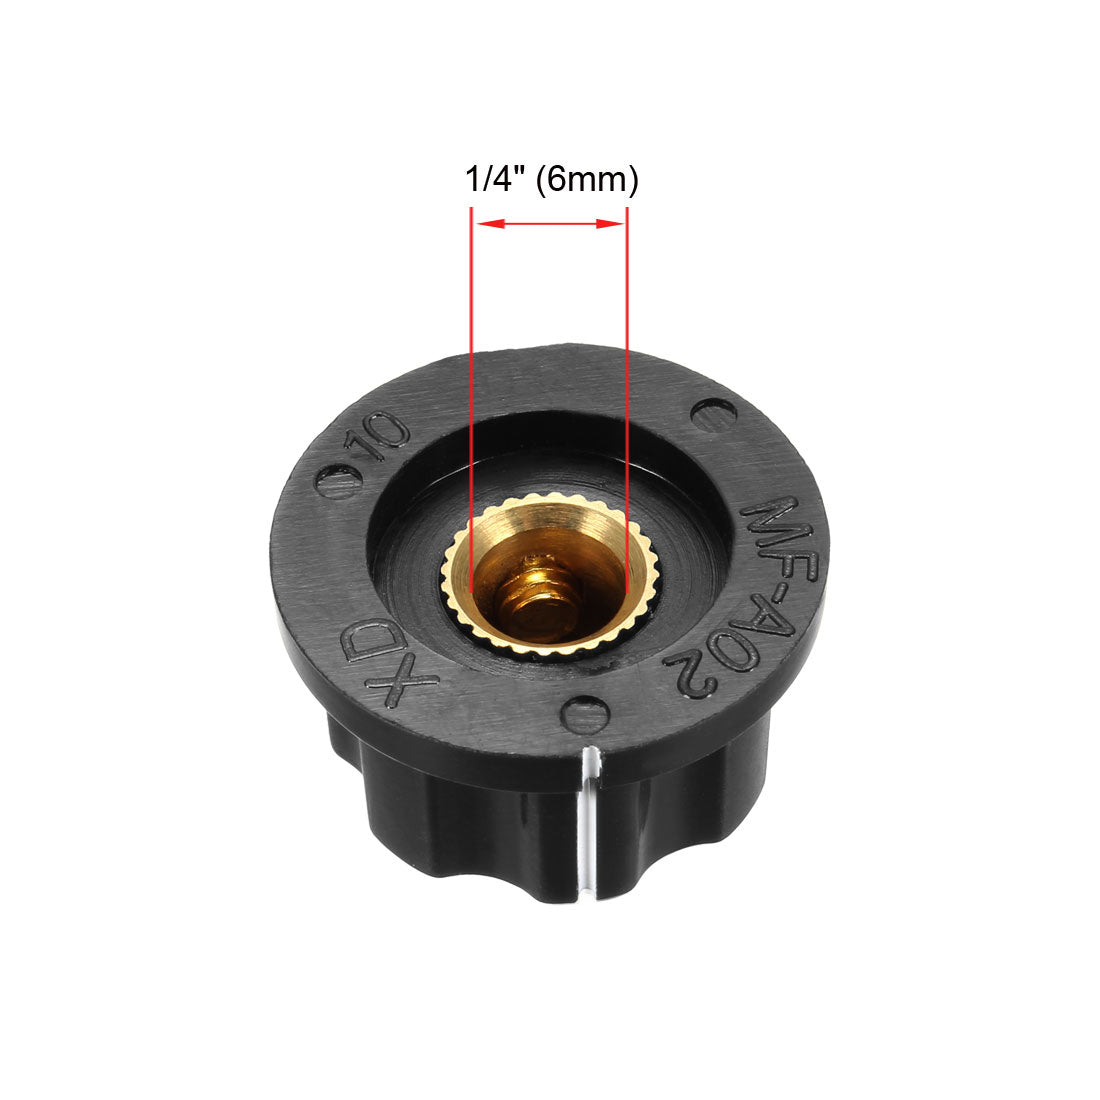 uxcell Uxcell 5Pcs Speaker Control Knob Power Amplifier Knob 23mm Dia. Rotary Knobs for 6mm Dia. Shaft Potentiometer